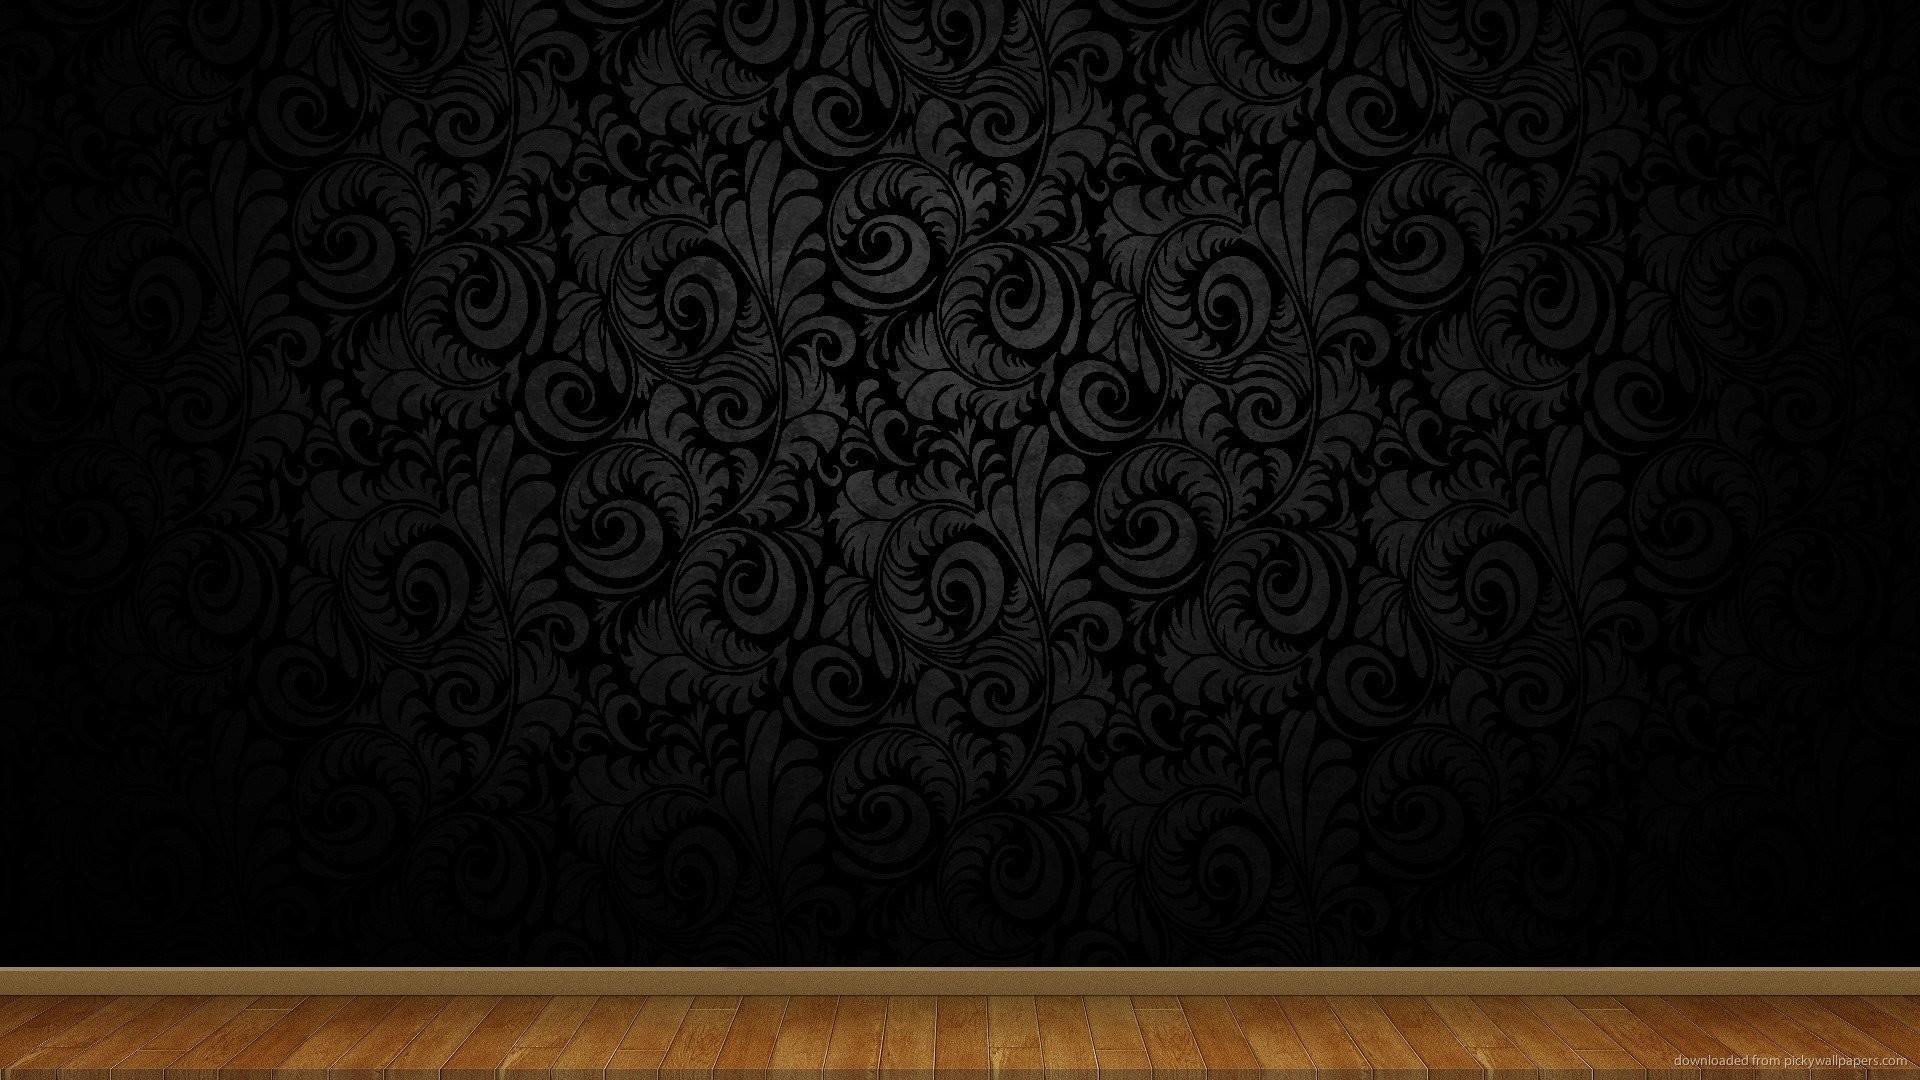 1920x1080 Dark Wood Wallpaper Tags Beautiful White Black Modern Design Painting Ideas  For Bedrooms Bed Mattres Cushion Deluxe Long Gloss Finish Ikea Base Cabinet  Tv ...